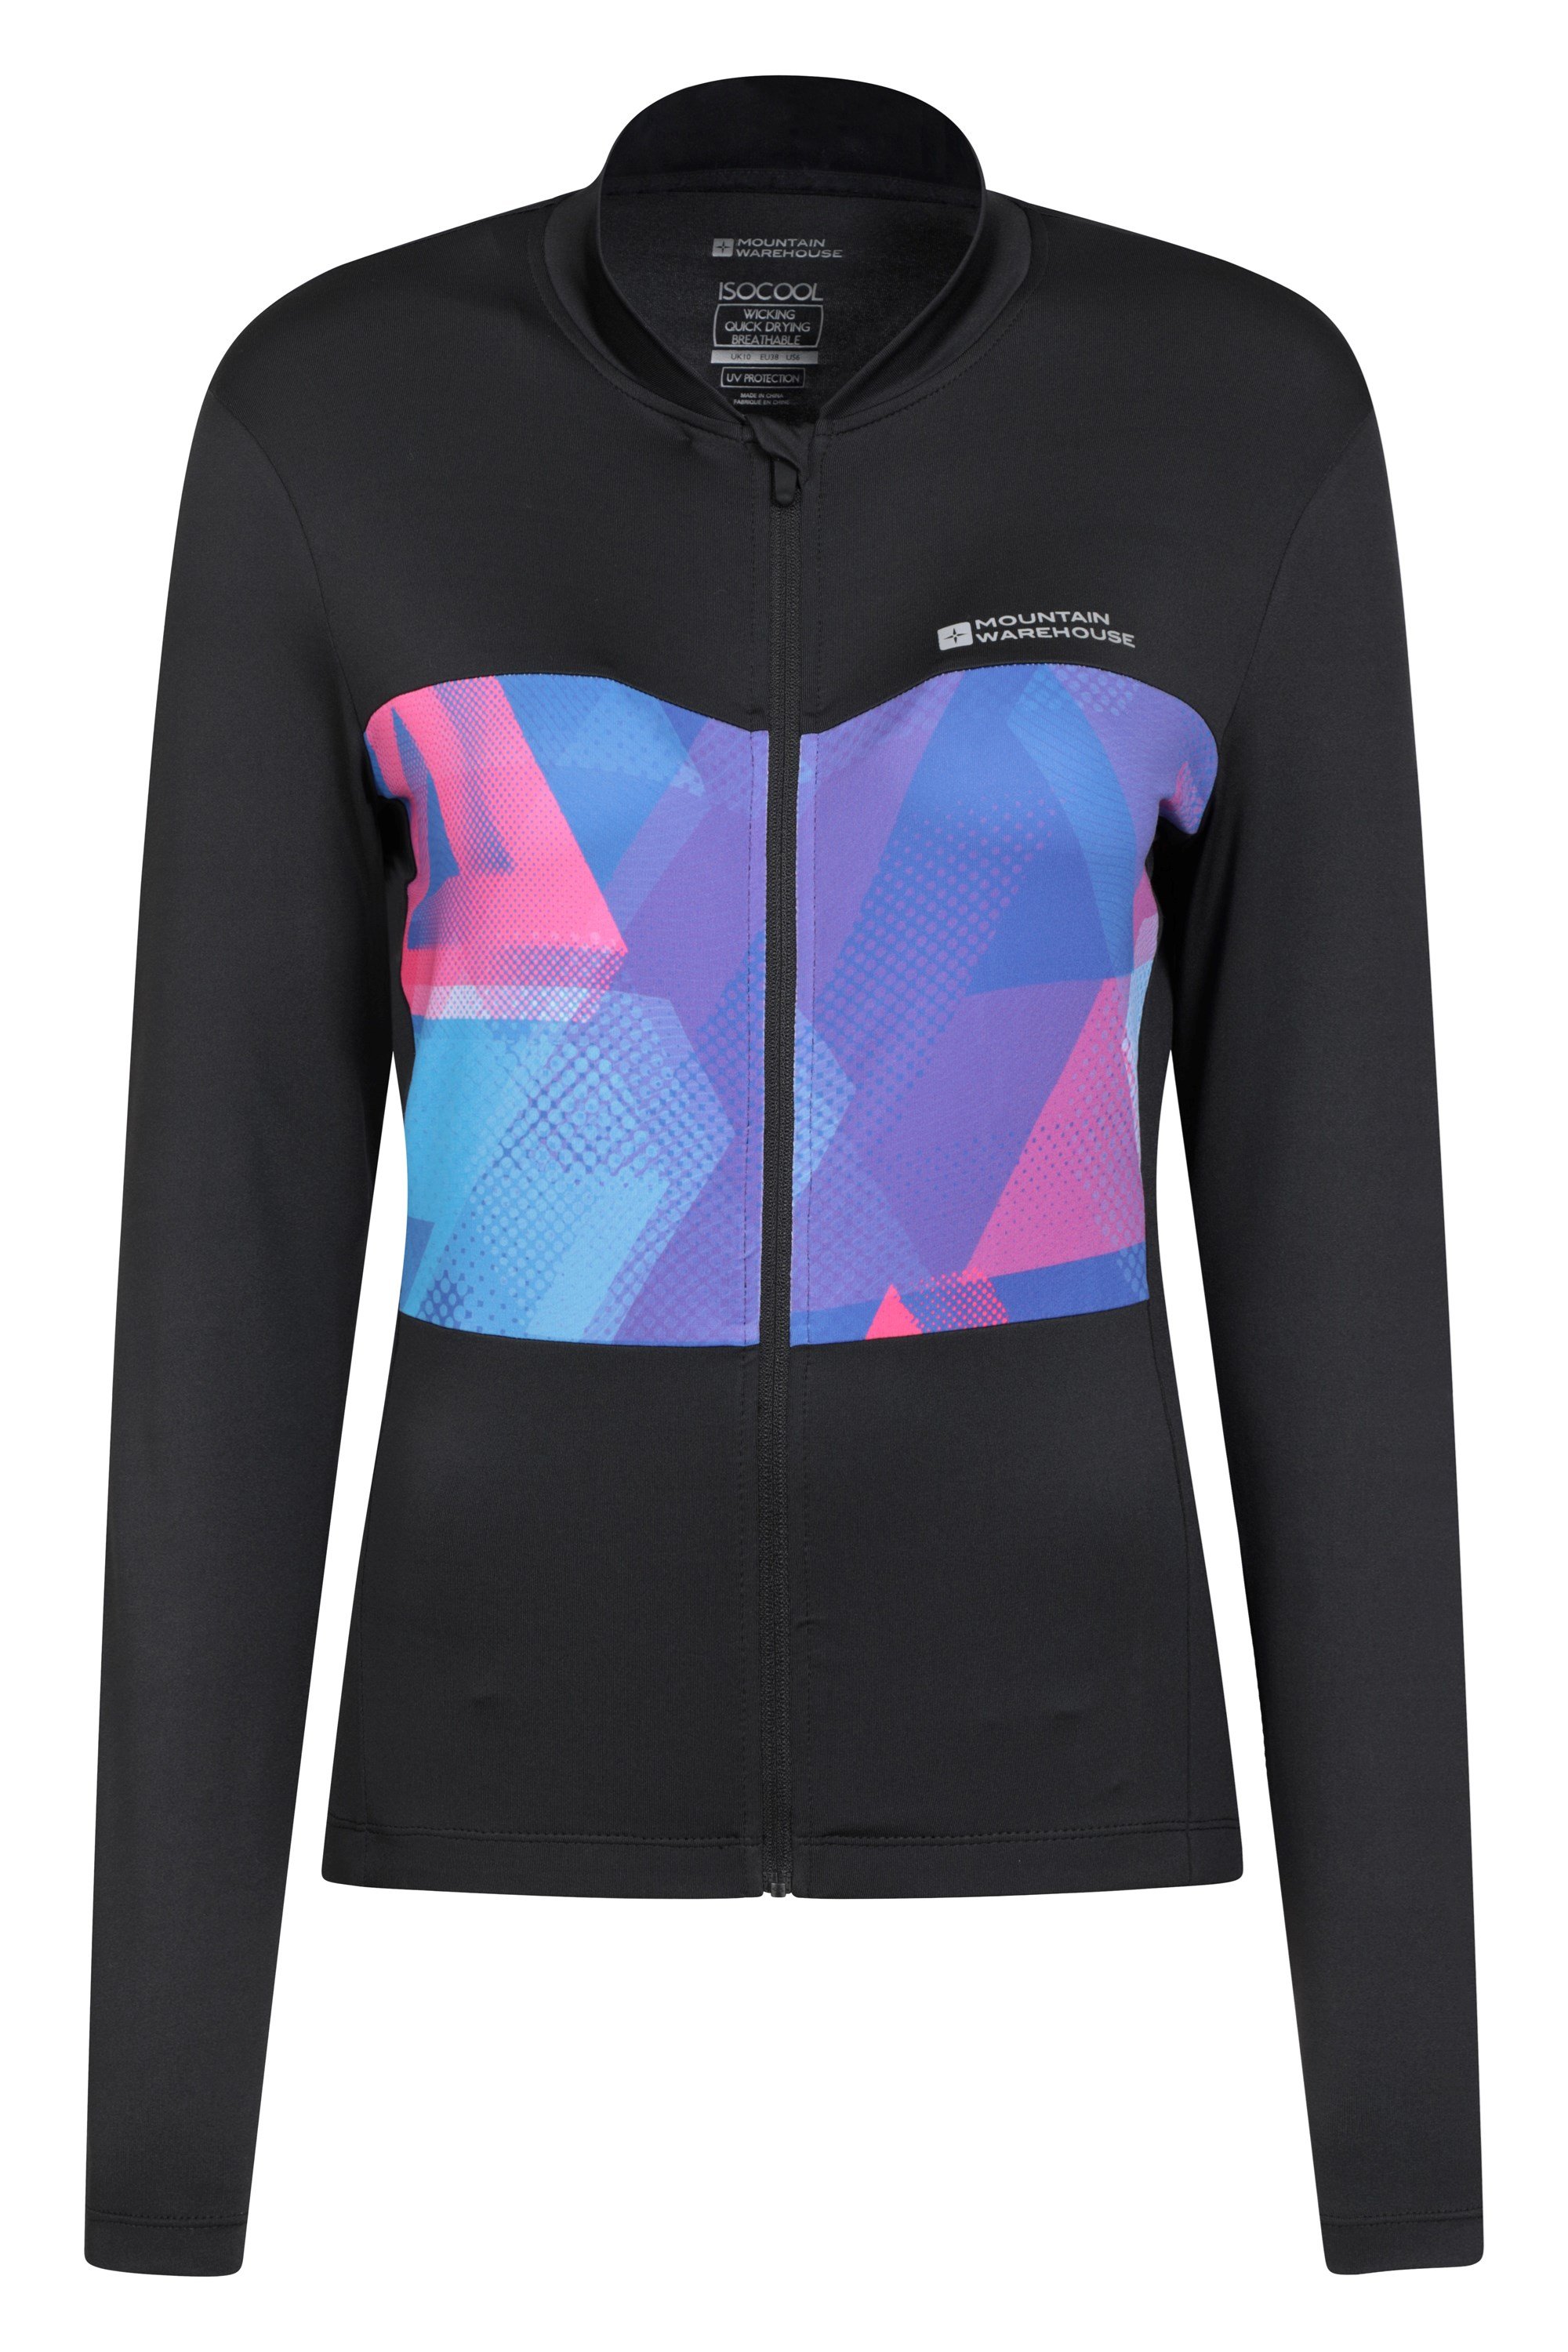 Chaser Printed Womens Full-zip Cycling Jersey - Black